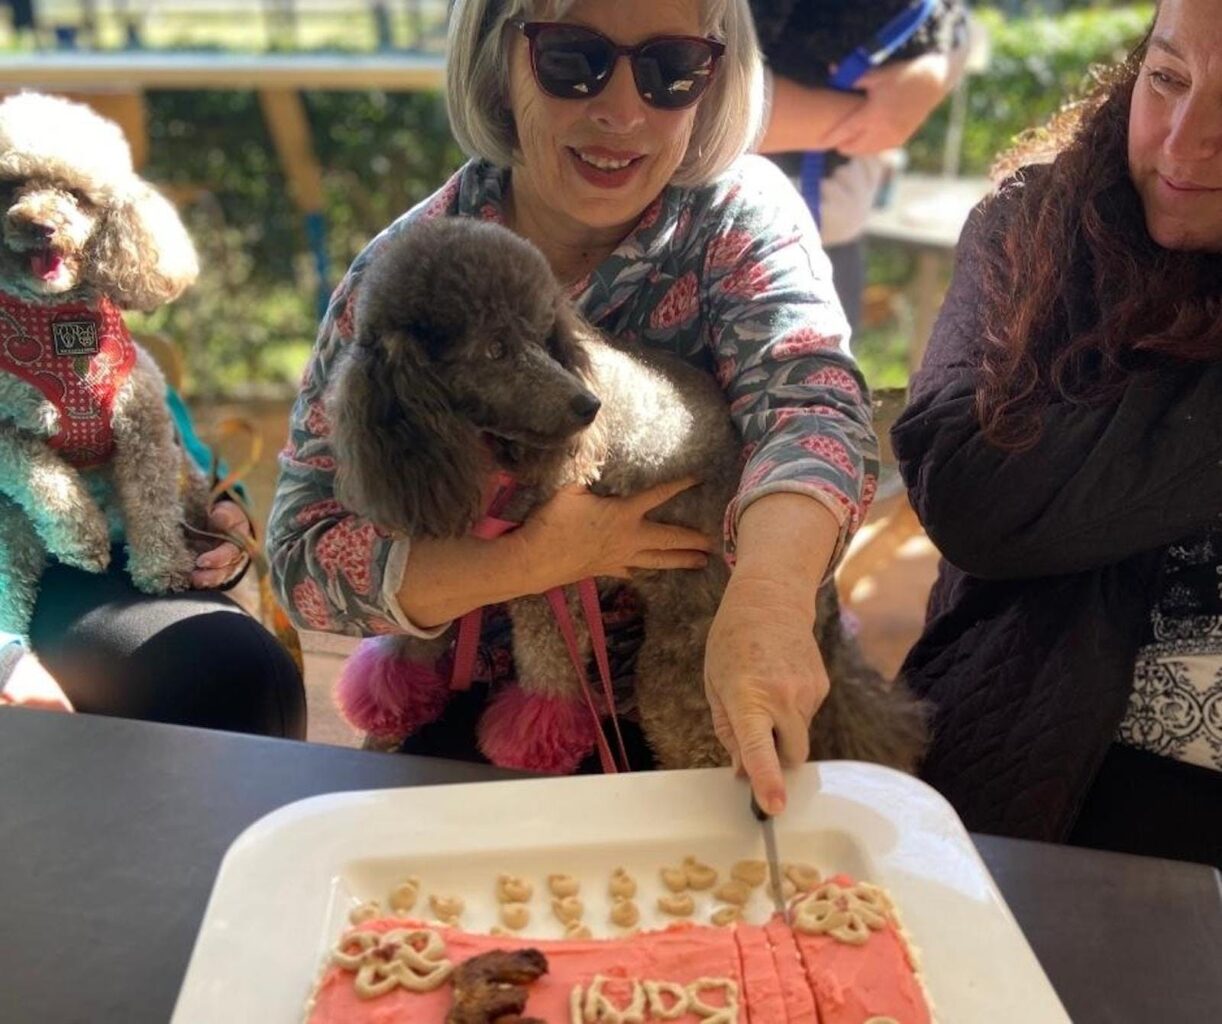 Lady cutting a birthday cake for her dog's 3rd birthday party at Creekside Cafe